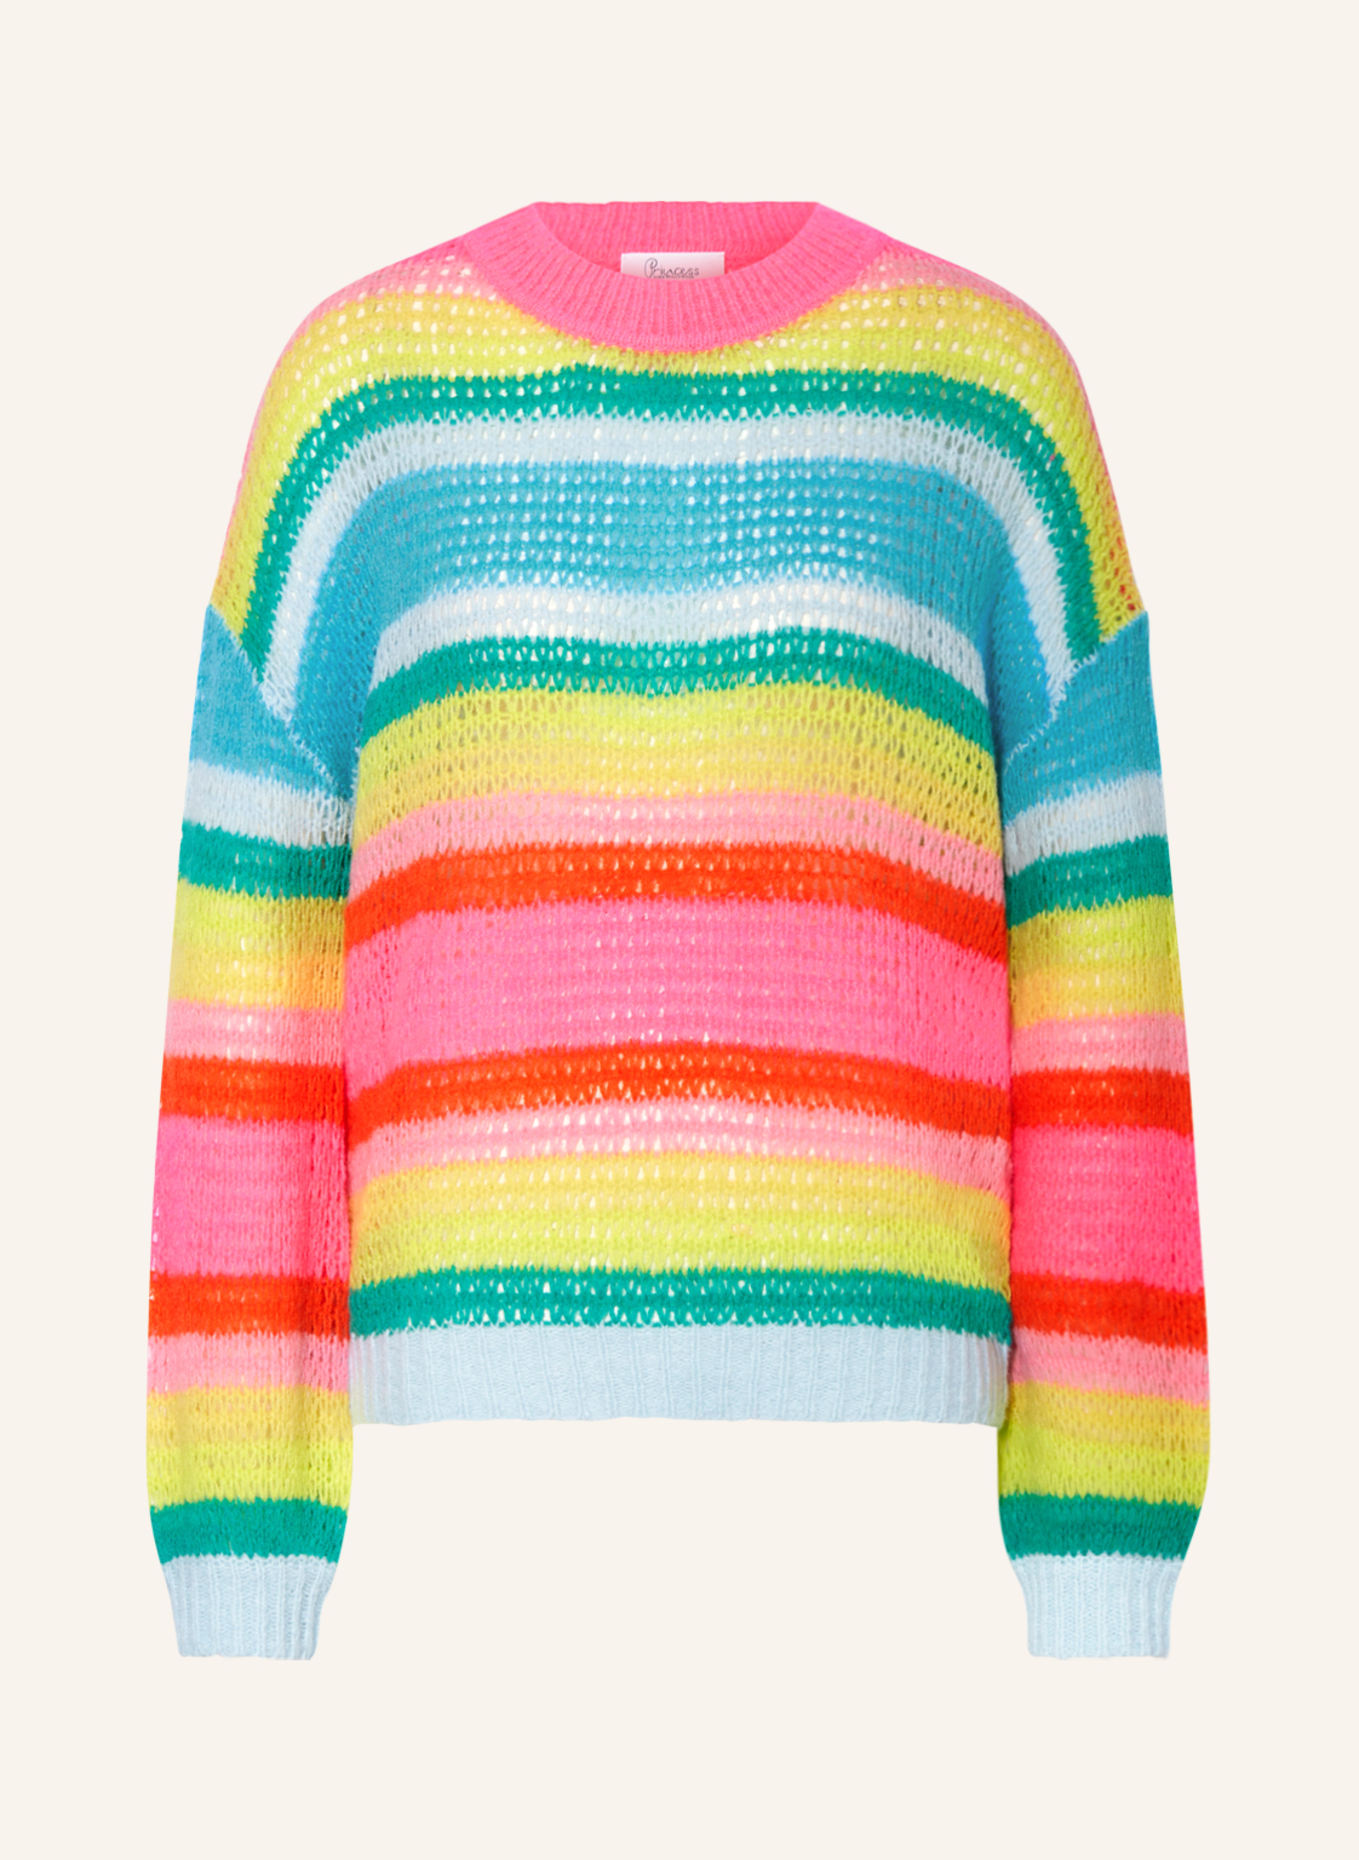 Princess GOES HOLLYWOOD Sweater, Color: NEON PINK/ NEON BLUE/ GREEN (Image 1)